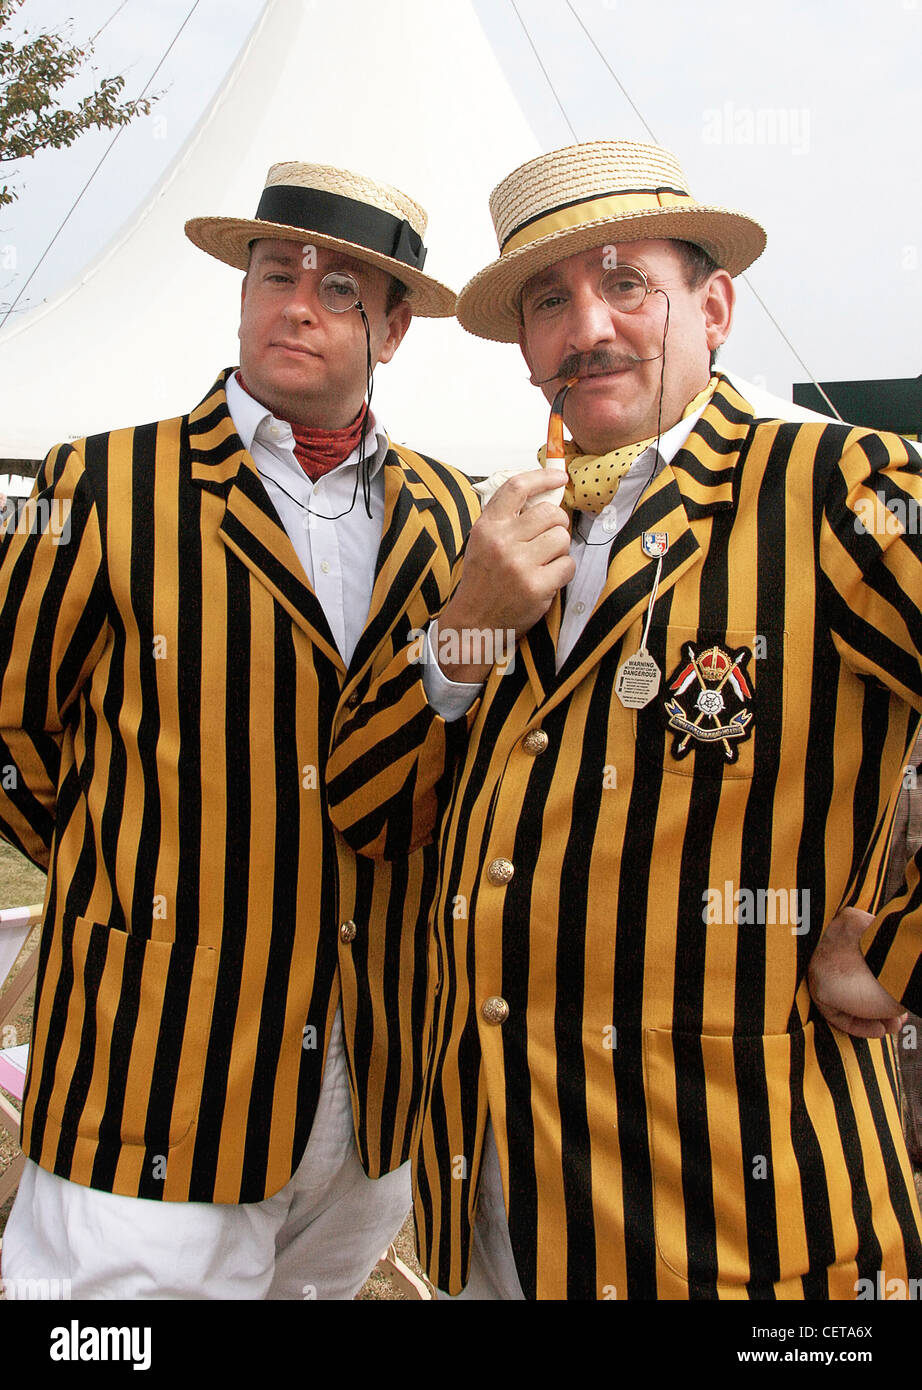 Men in retro outfits with straw hats, monocle eyeglass, pipe and jackets at Goodwood Revival. Stock Photo